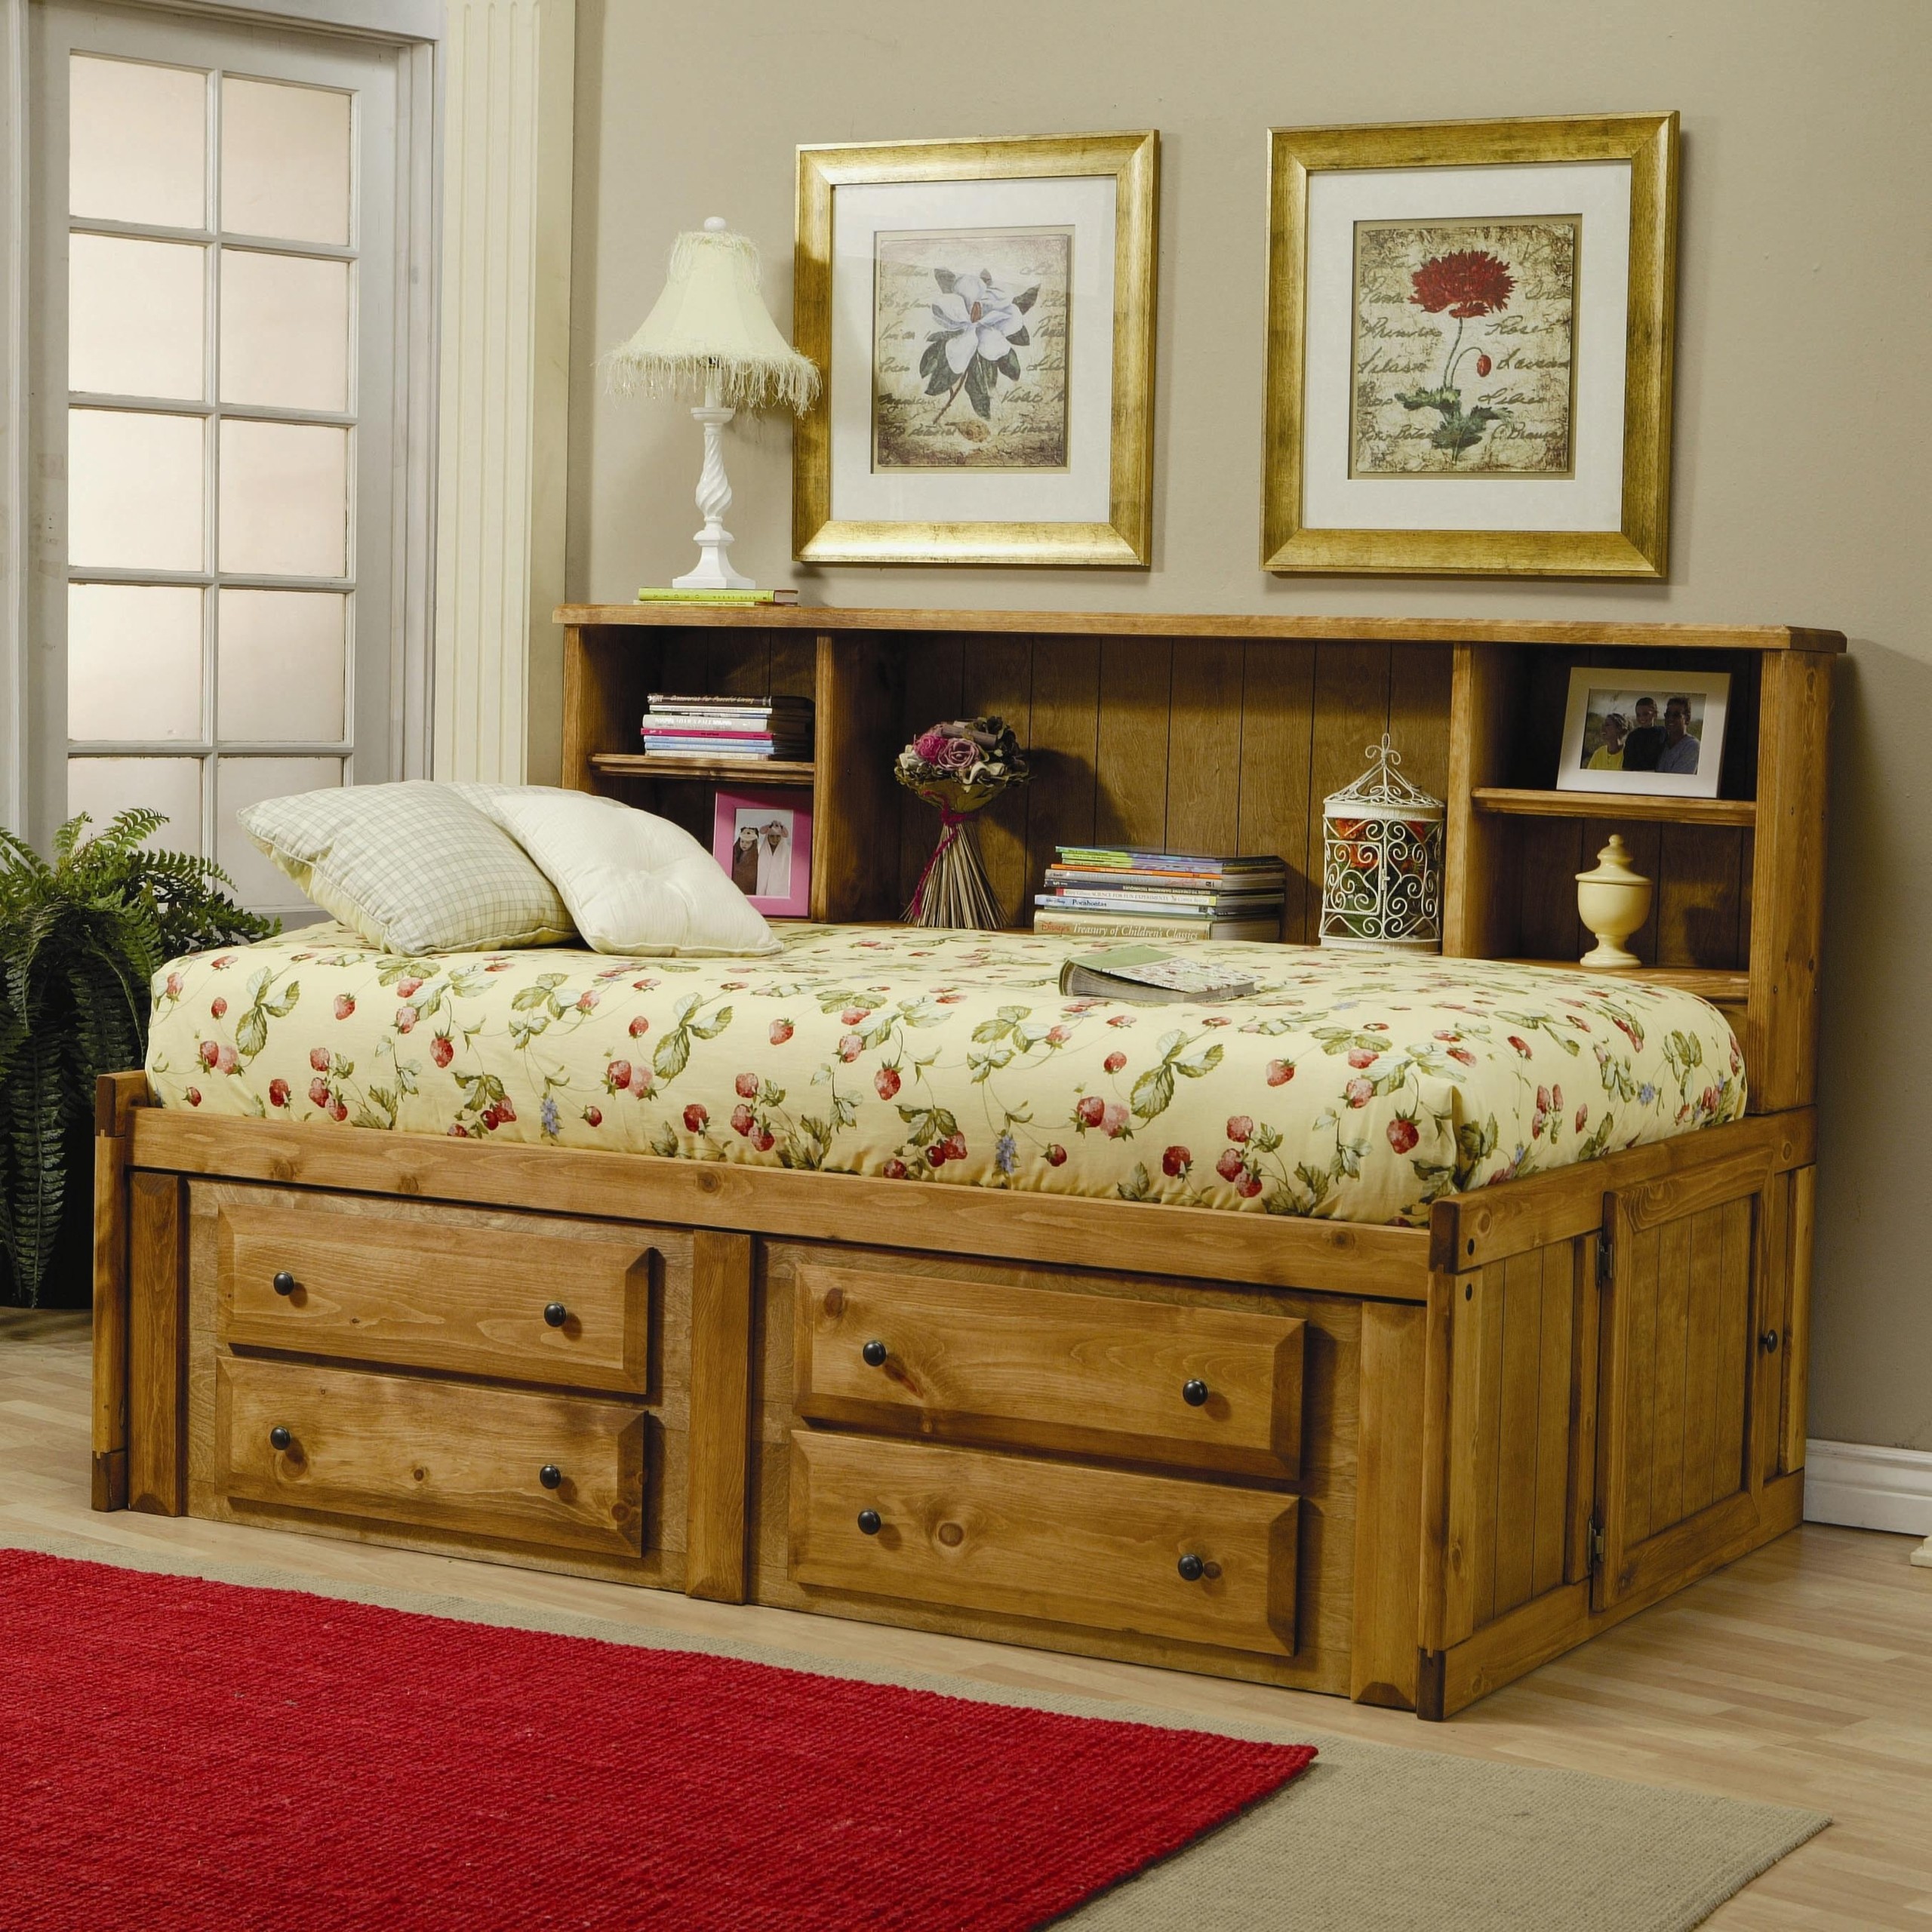 Rustic storage bed design in woodwork with bookcase headboard and